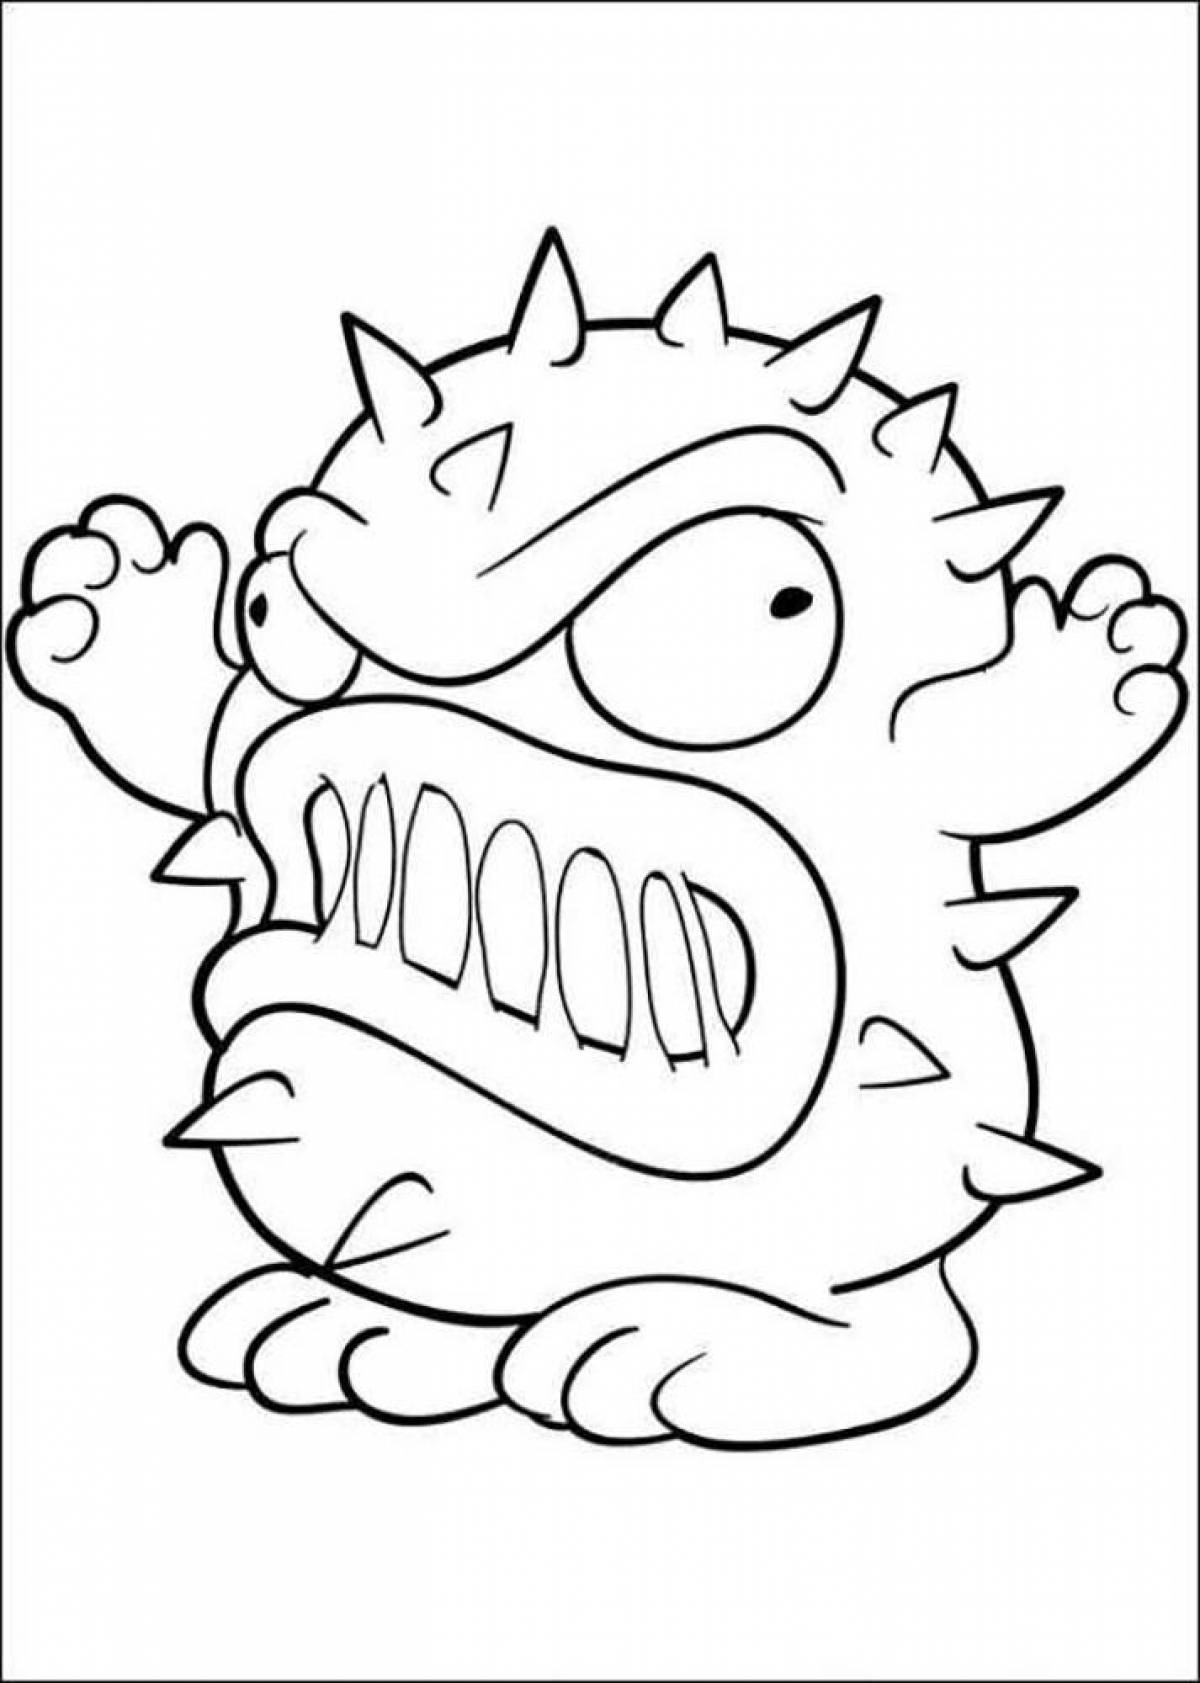 Monster monster coloring pages